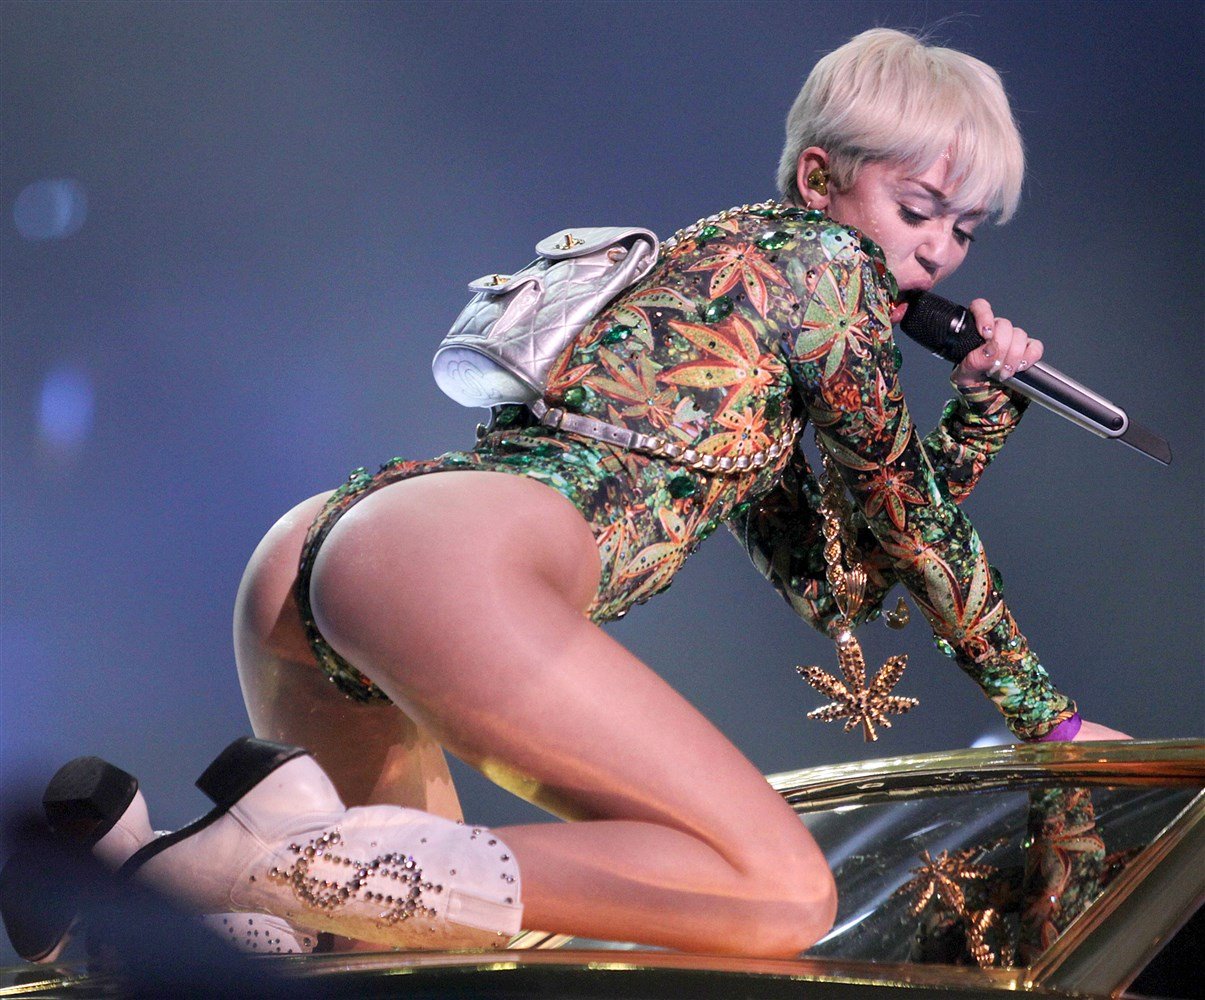 33 Epic Miley Cyrus Pics From Her ‘Bangerz’ Tour